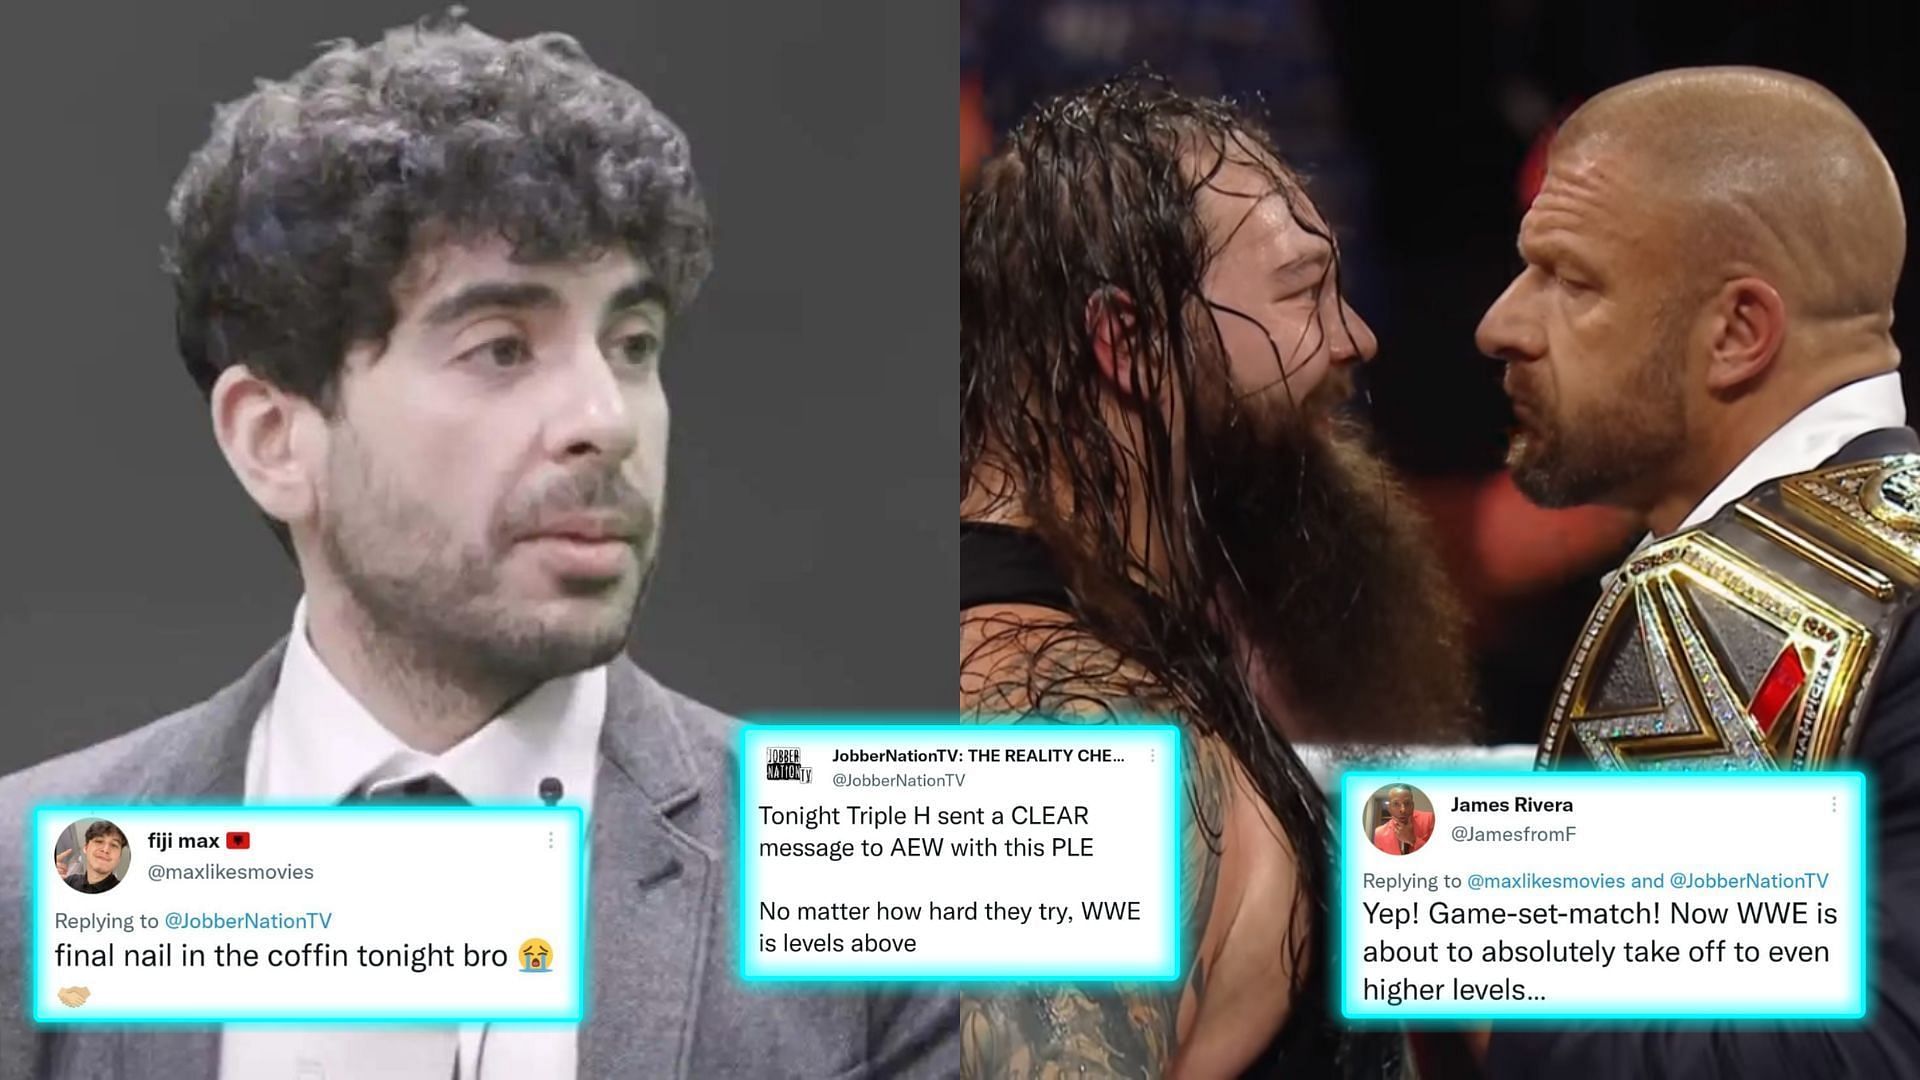 Wrestling fans took digs at Tony Khan after this year